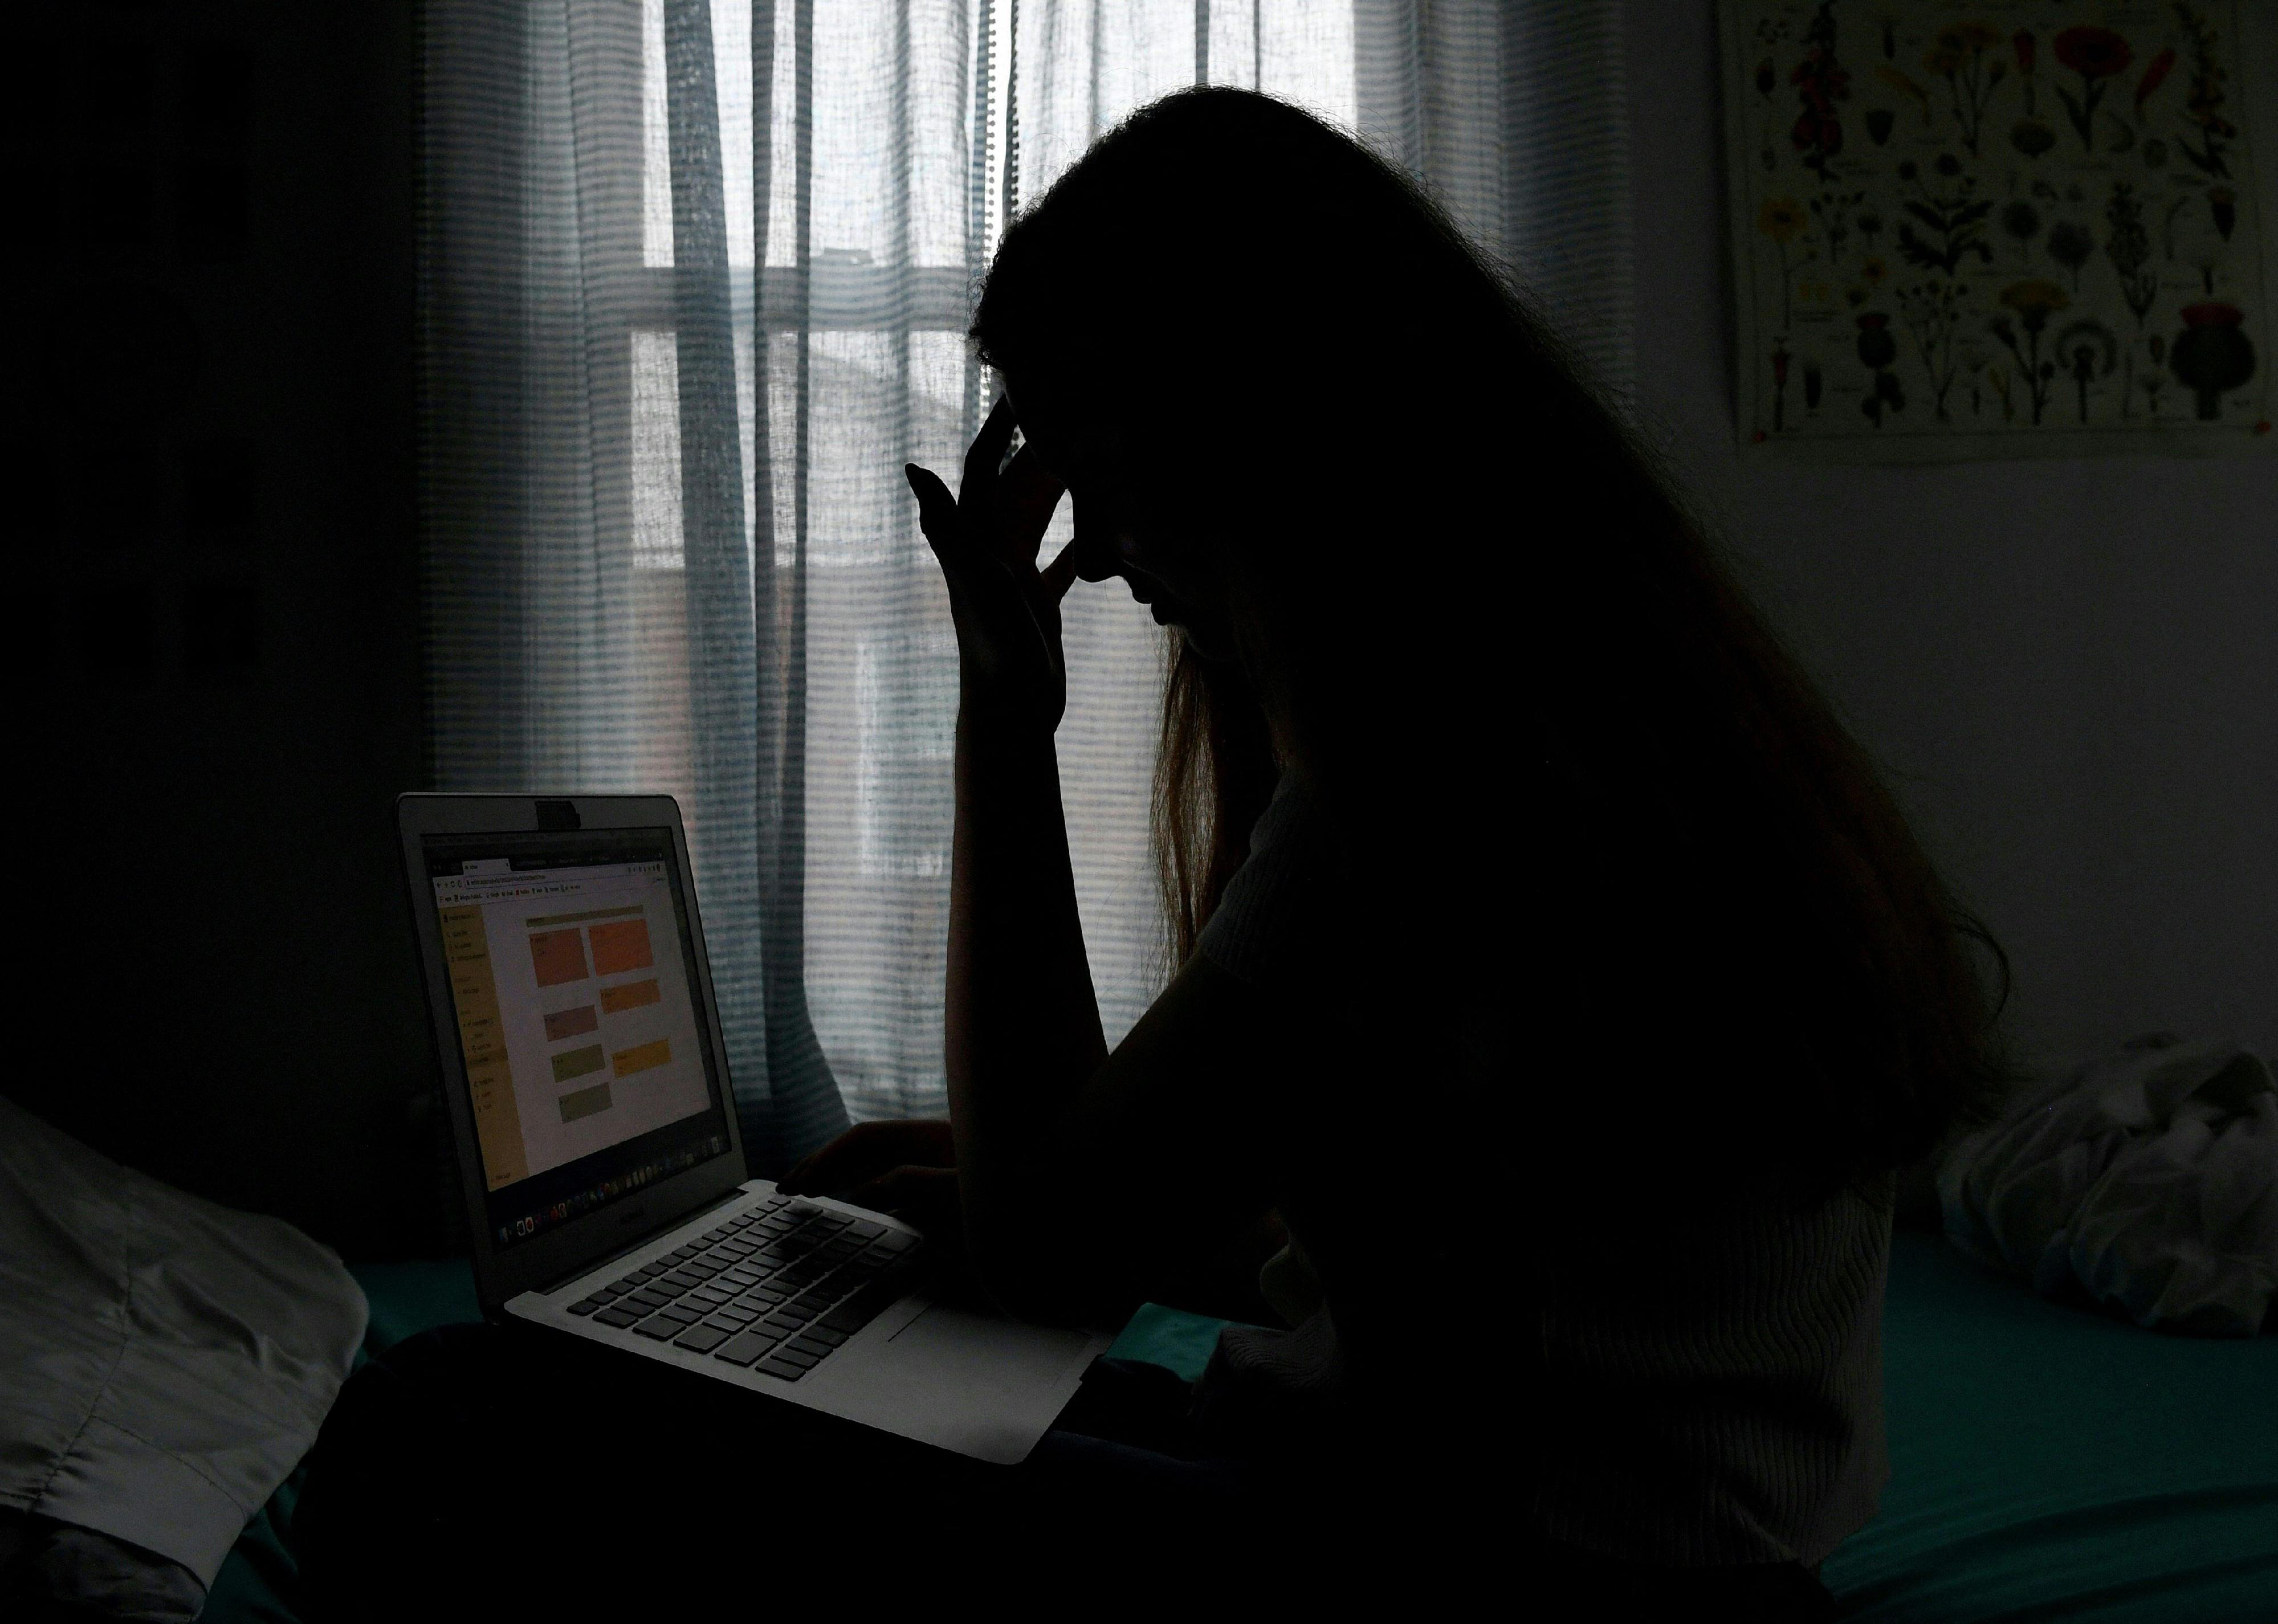 A teenager in the shadows sitting on a bed with her hand on her head.